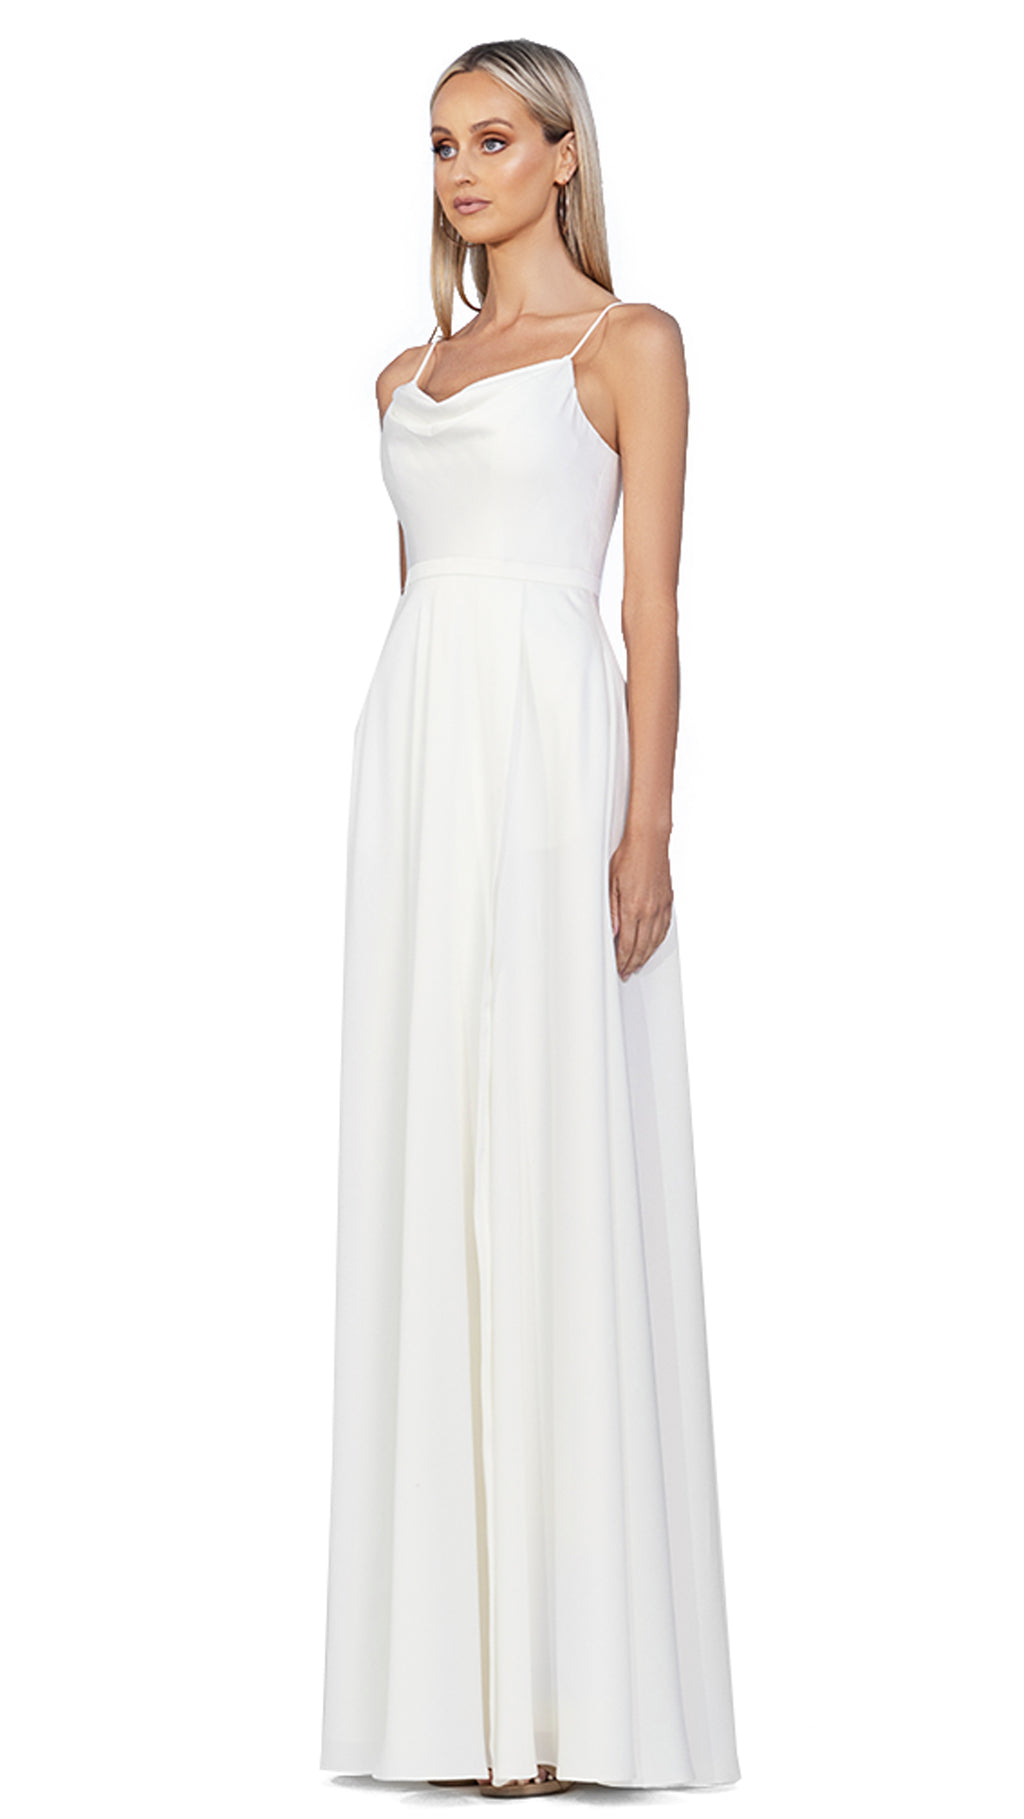 Bariano Diamond Cowl Wrap Gown in White  - SIDE